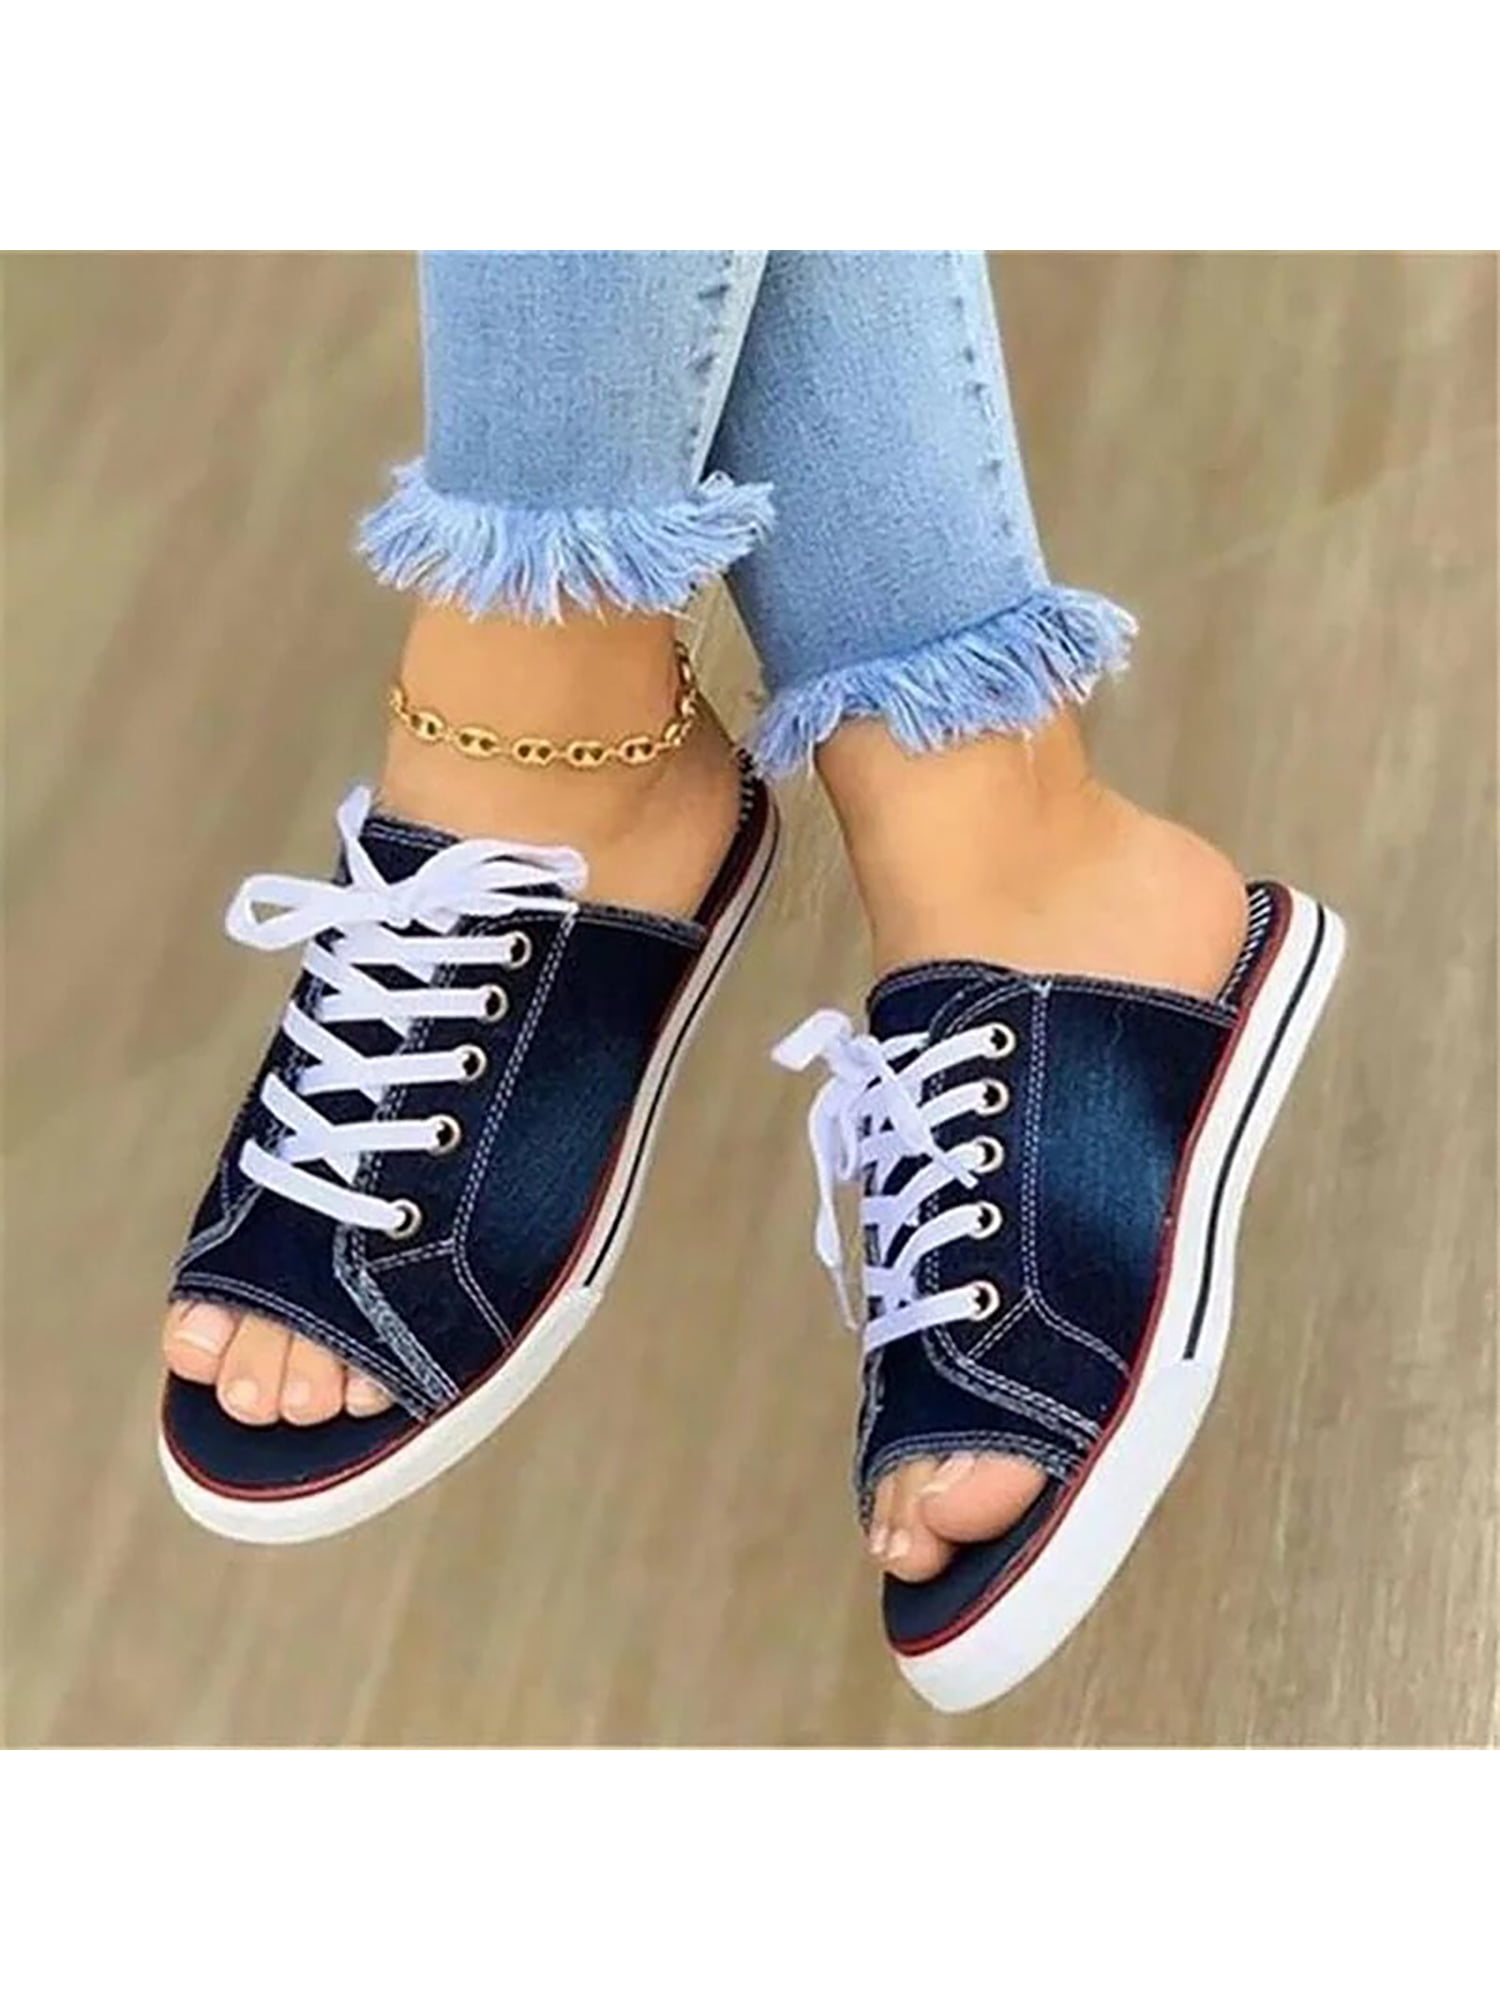 Women Fashion Canvas Shoes Women's Summer Hot Denim Casual Shoes Lace-Up  Non-Slip Shoes For Girls Breathable Walking Sneakers